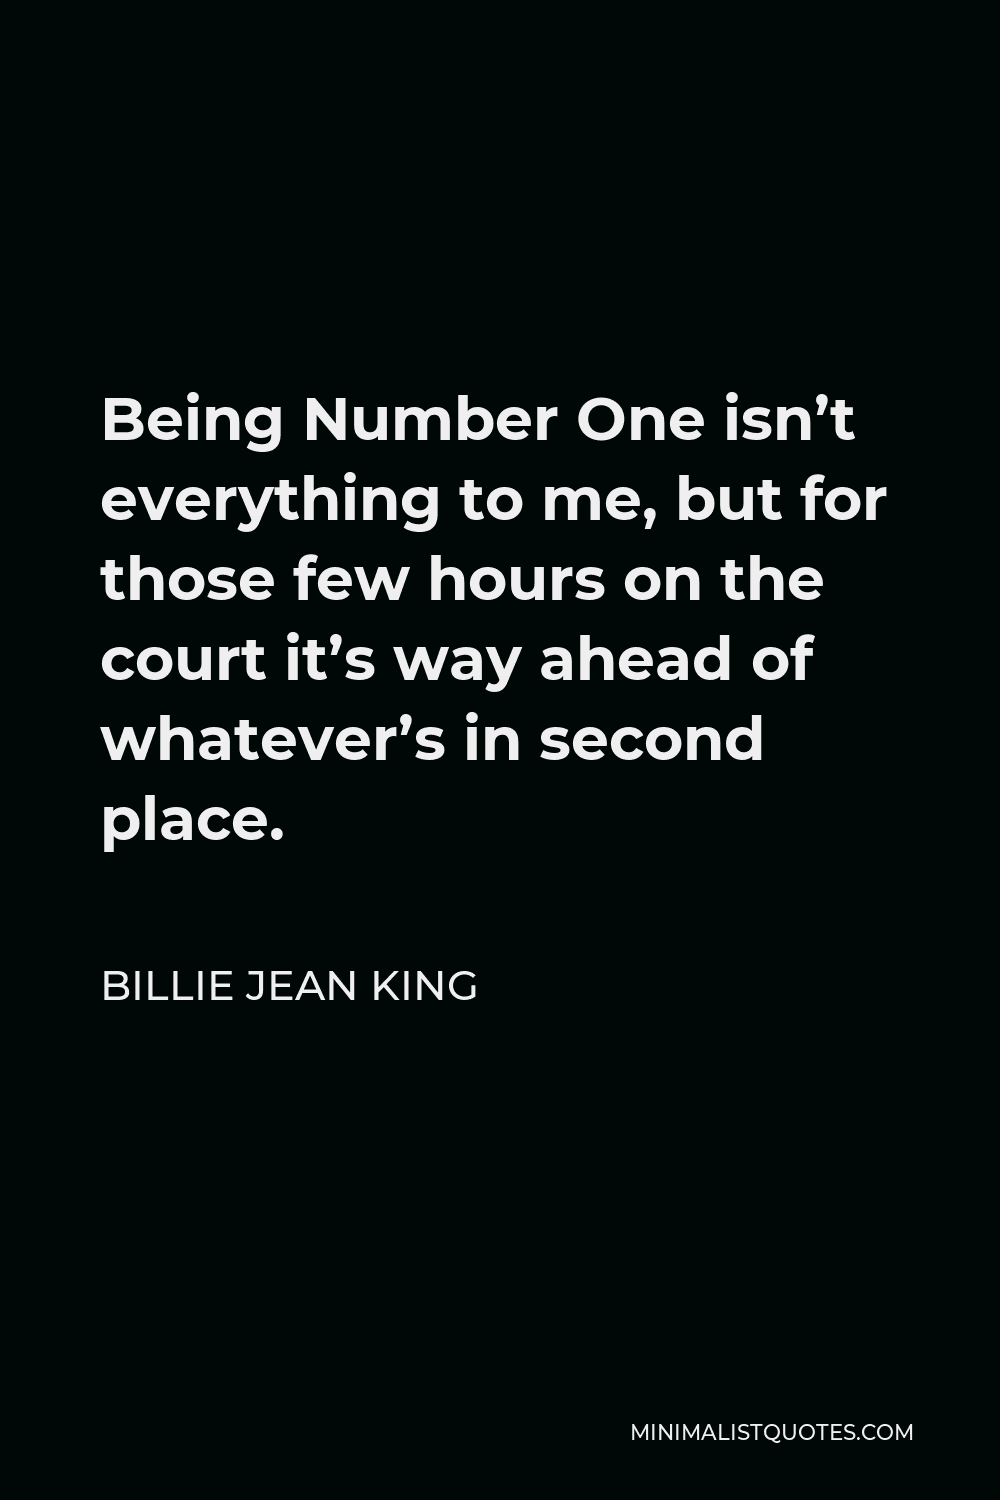 Billie Jean King Quote - Being Number One isn’t everything to me, but for those few hours on the court it’s way ahead of whatever’s in second place.